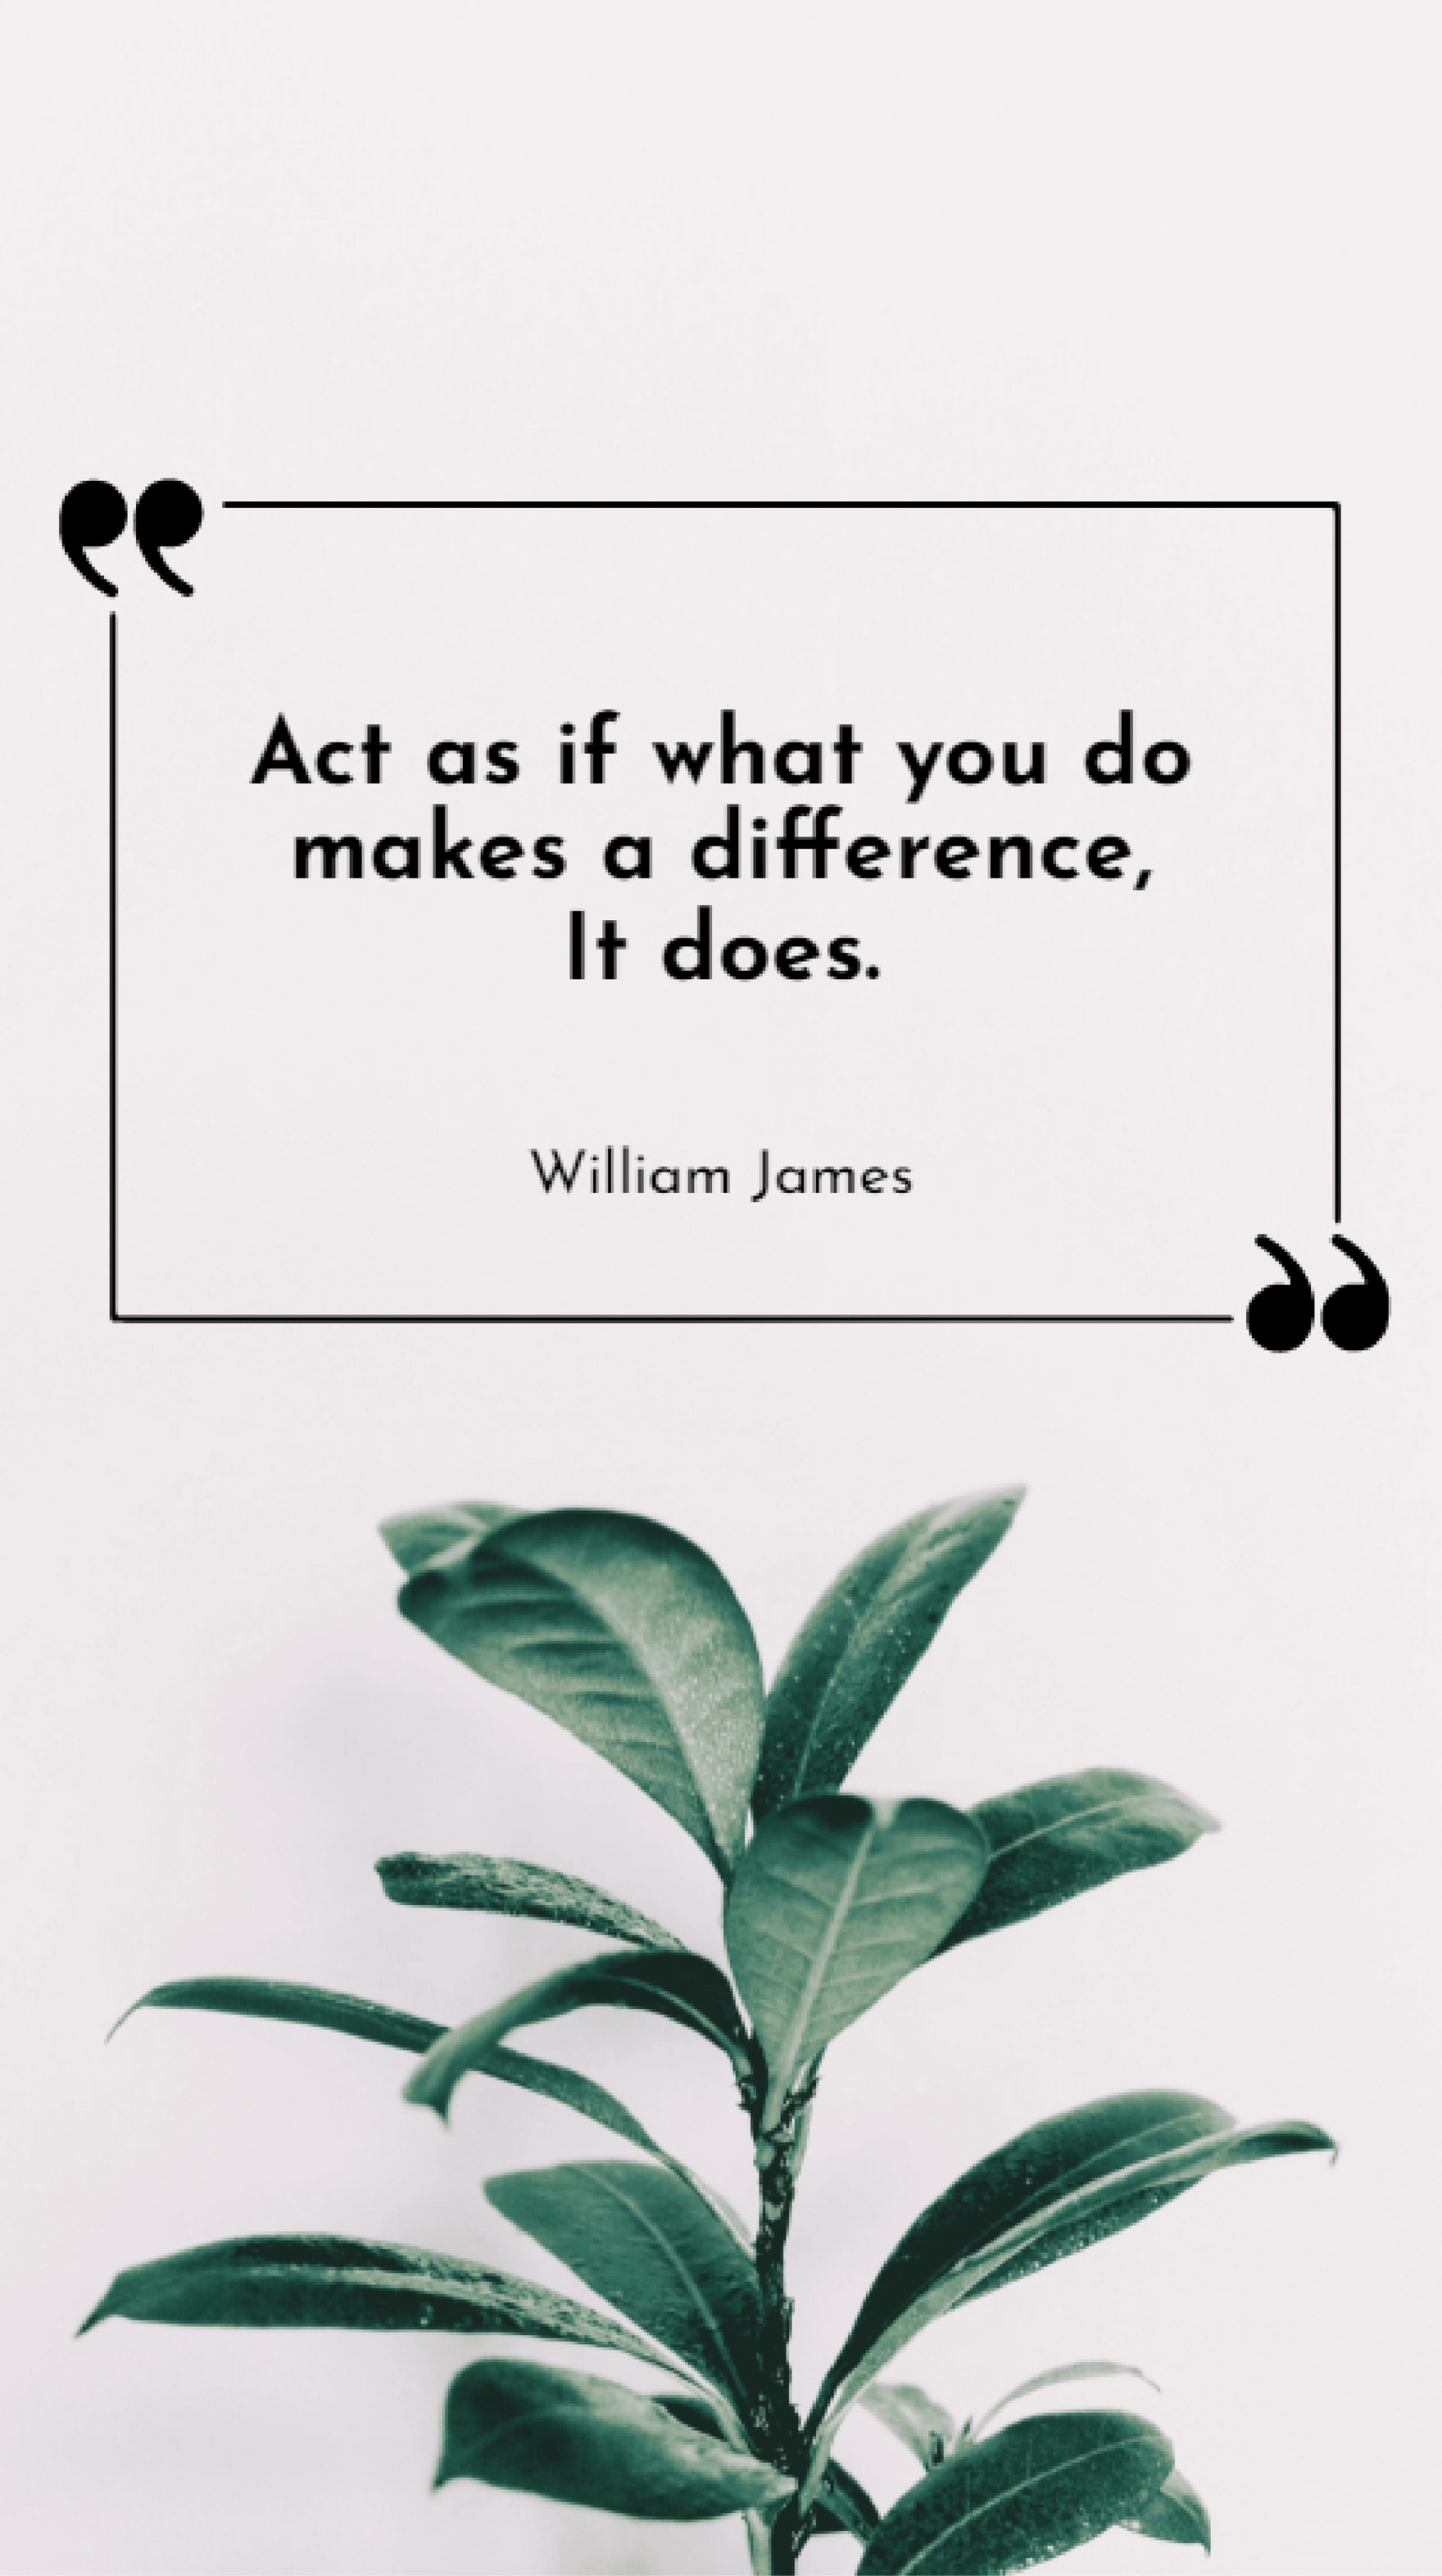 William James - Act as if what you do makes a difference, It does